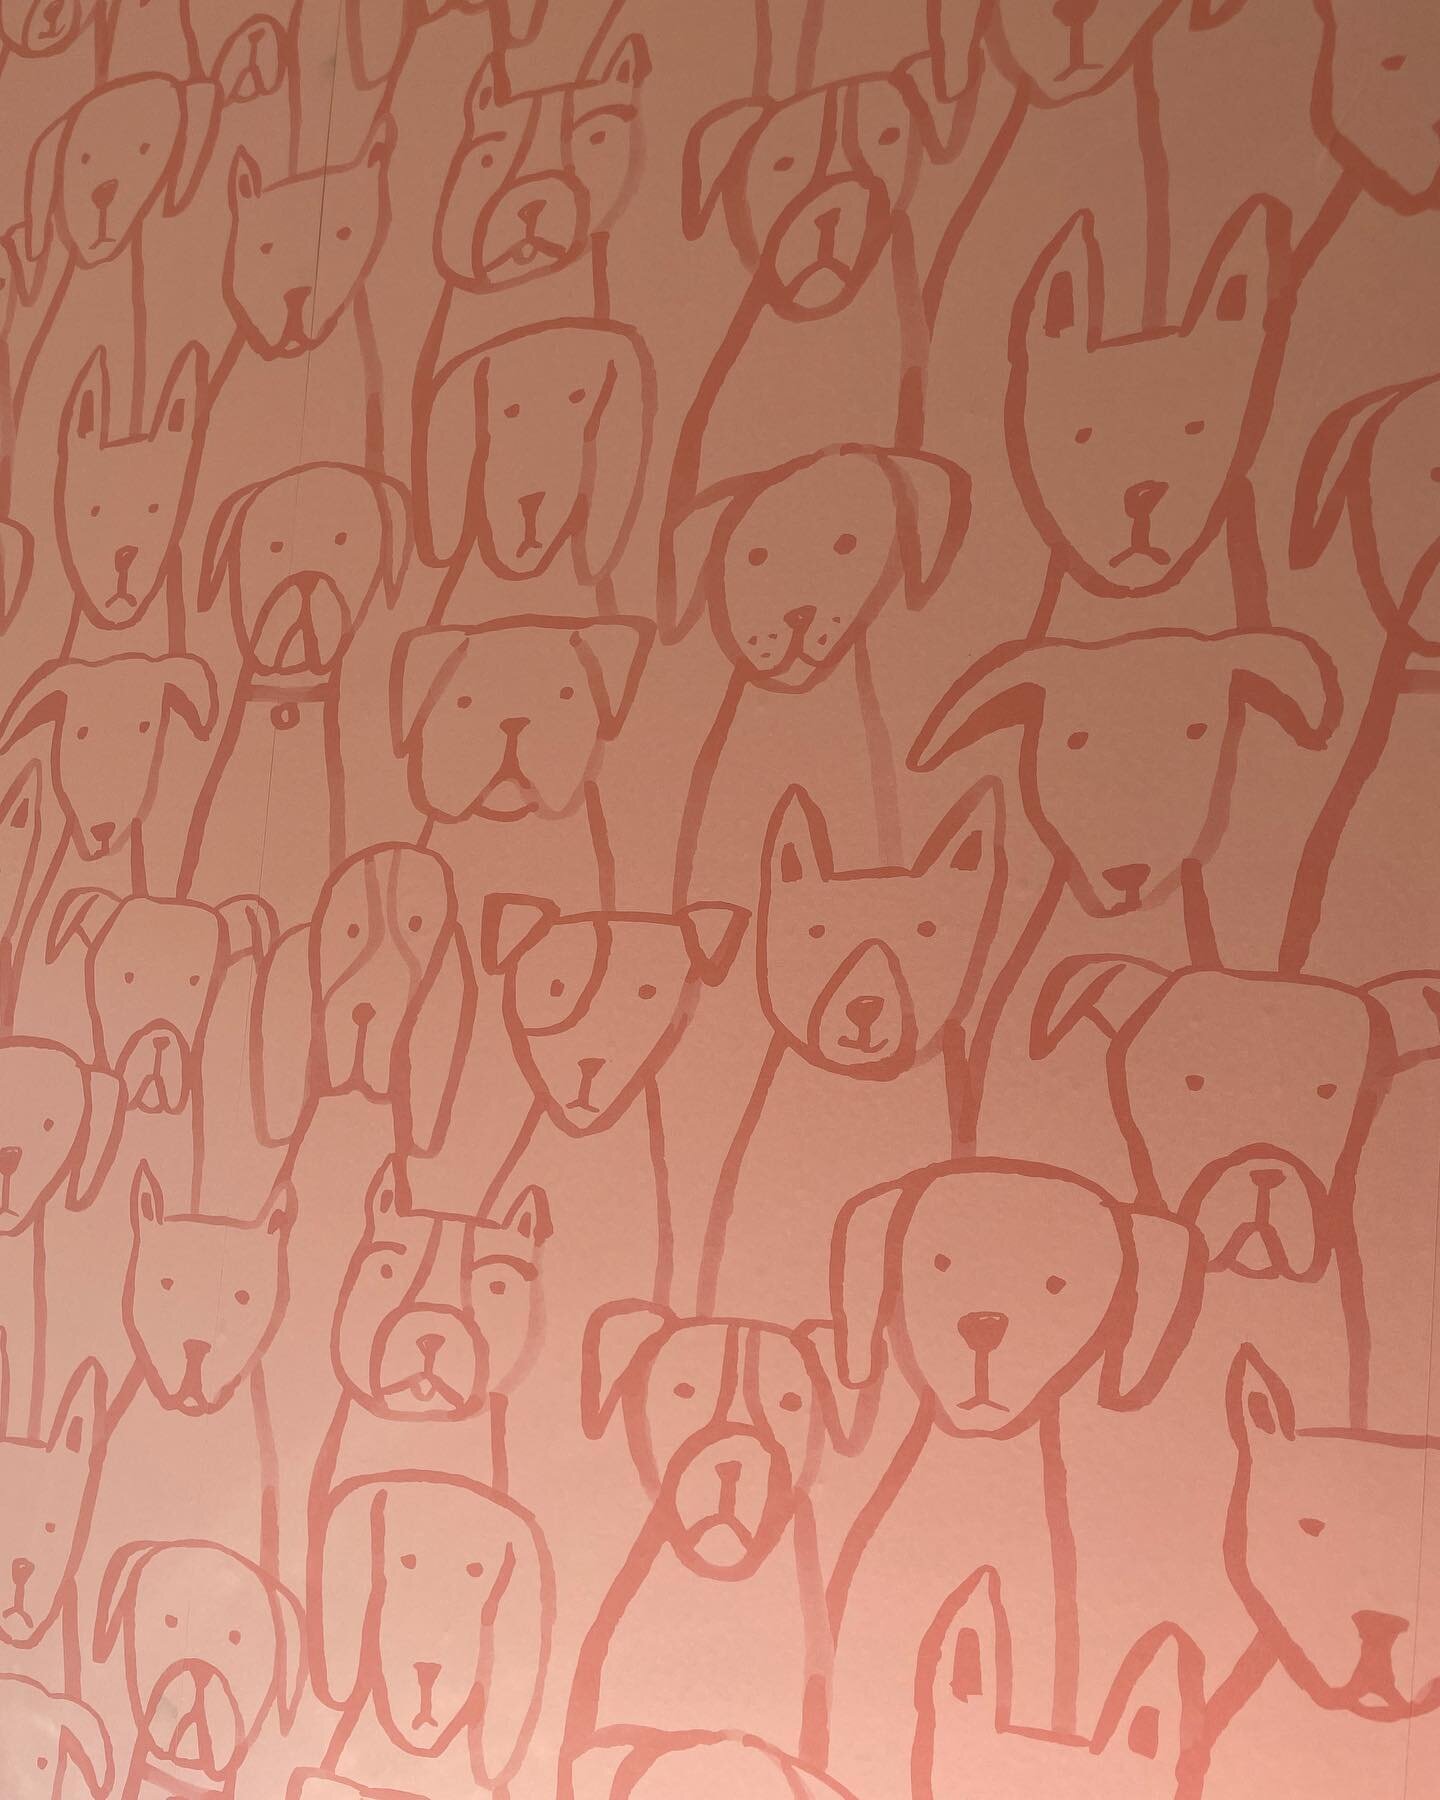 &hearts;️ when you get to see the adorable wallpaper in your client&rsquo;s nursery &hearts;️ prenatal visits are the BEST

#labourdaydoula #labourdaydoulafamily #labourdaydoulababy #prenatal #babyroomdecor #doggywallpaper 
#ilovemyjob